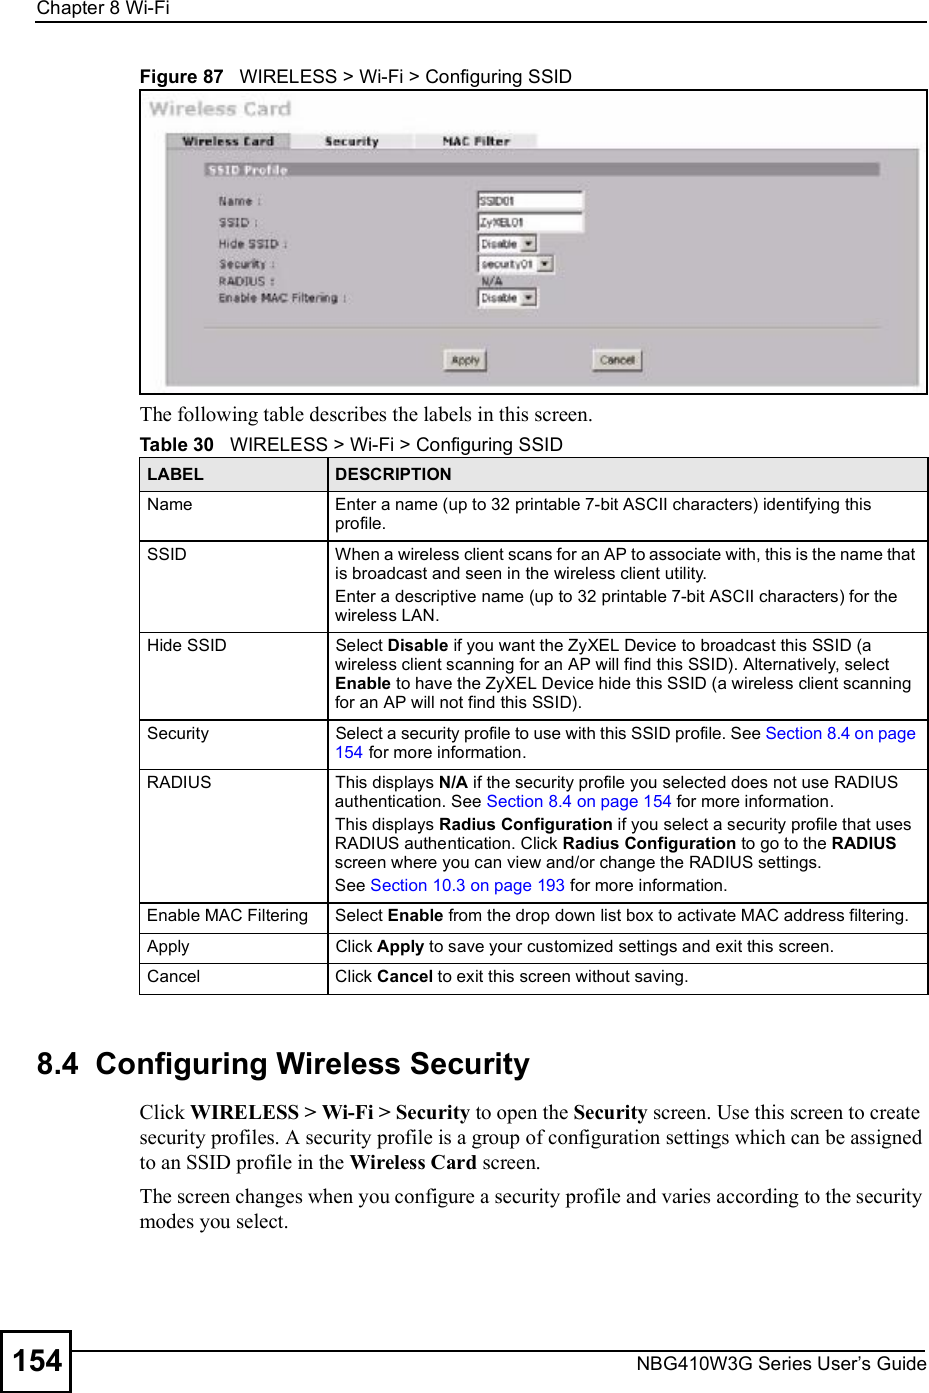 Chapter 8Wi-FiNBG410W3G Series User s Guide154Figure 87   WIRELESS &gt; Wi-Fi &gt; Configuring SSIDThe following table describes the labels in this screen.8.4  Configuring Wireless SecurityClick WIRELESS &gt; Wi-Fi &gt; Security to open the Security screen. Use this screen to create security profiles. A security profile is a group of configuration settings which can be assigned to an SSID profile in the Wireless Card screen.The screen changes when you configure a security profile and varies according to the security modes you select. Table 30   WIRELESS &gt; Wi-Fi &gt; Configuring SSIDLABEL DESCRIPTIONNameEnter a name (up to 32 printable 7-bit ASCII characters) identifying this profile.SSIDWhen a wireless client scans for an AP to associate with, this is the name that is broadcast and seen in the wireless client utility.Enter a descriptive name (up to 32 printable 7-bit ASCII characters) for the wireless LAN. Hide SSIDSelect Disable if you want the ZyXEL Device to broadcast this SSID (a wireless client scanning for an AP will find this SSID). Alternatively, select Enable to have the ZyXEL Device hide this SSID (a wireless client scanning for an AP will not find this SSID).SecuritySelect a security profile to use with this SSID profile. See Section 8.4 on page 154 for more information.RADIUSThis displays N/A if the security profile you selected does not use RADIUS authentication. See Section 8.4 on page 154 for more information.This displays Radius Configuration if you select a security profile that uses RADIUS authentication. Click Radius Configuration to go to the RADIUS screen where you can view and/or change the RADIUS settings.See Section 10.3 on page 193 for more information.Enable MAC Filtering Select Enable from the drop down list box to activate MAC address filtering.ApplyClick Apply to save your customized settings and exit this screen.CancelClick Cancel to exit this screen without saving.